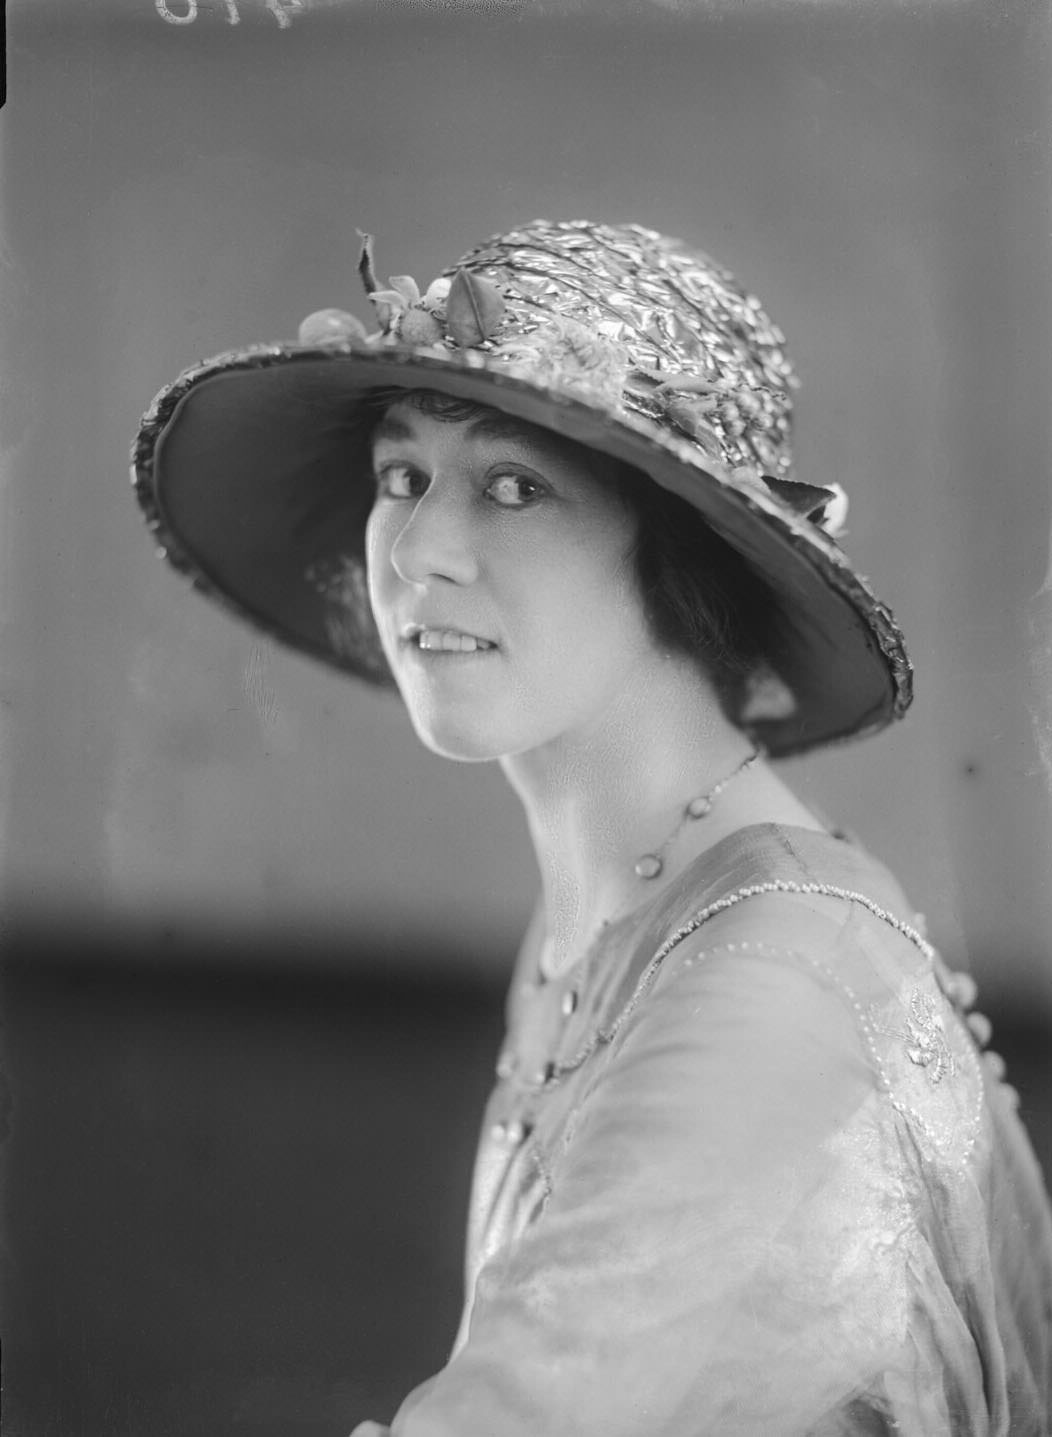 Portrait of an unknown woman in a hat